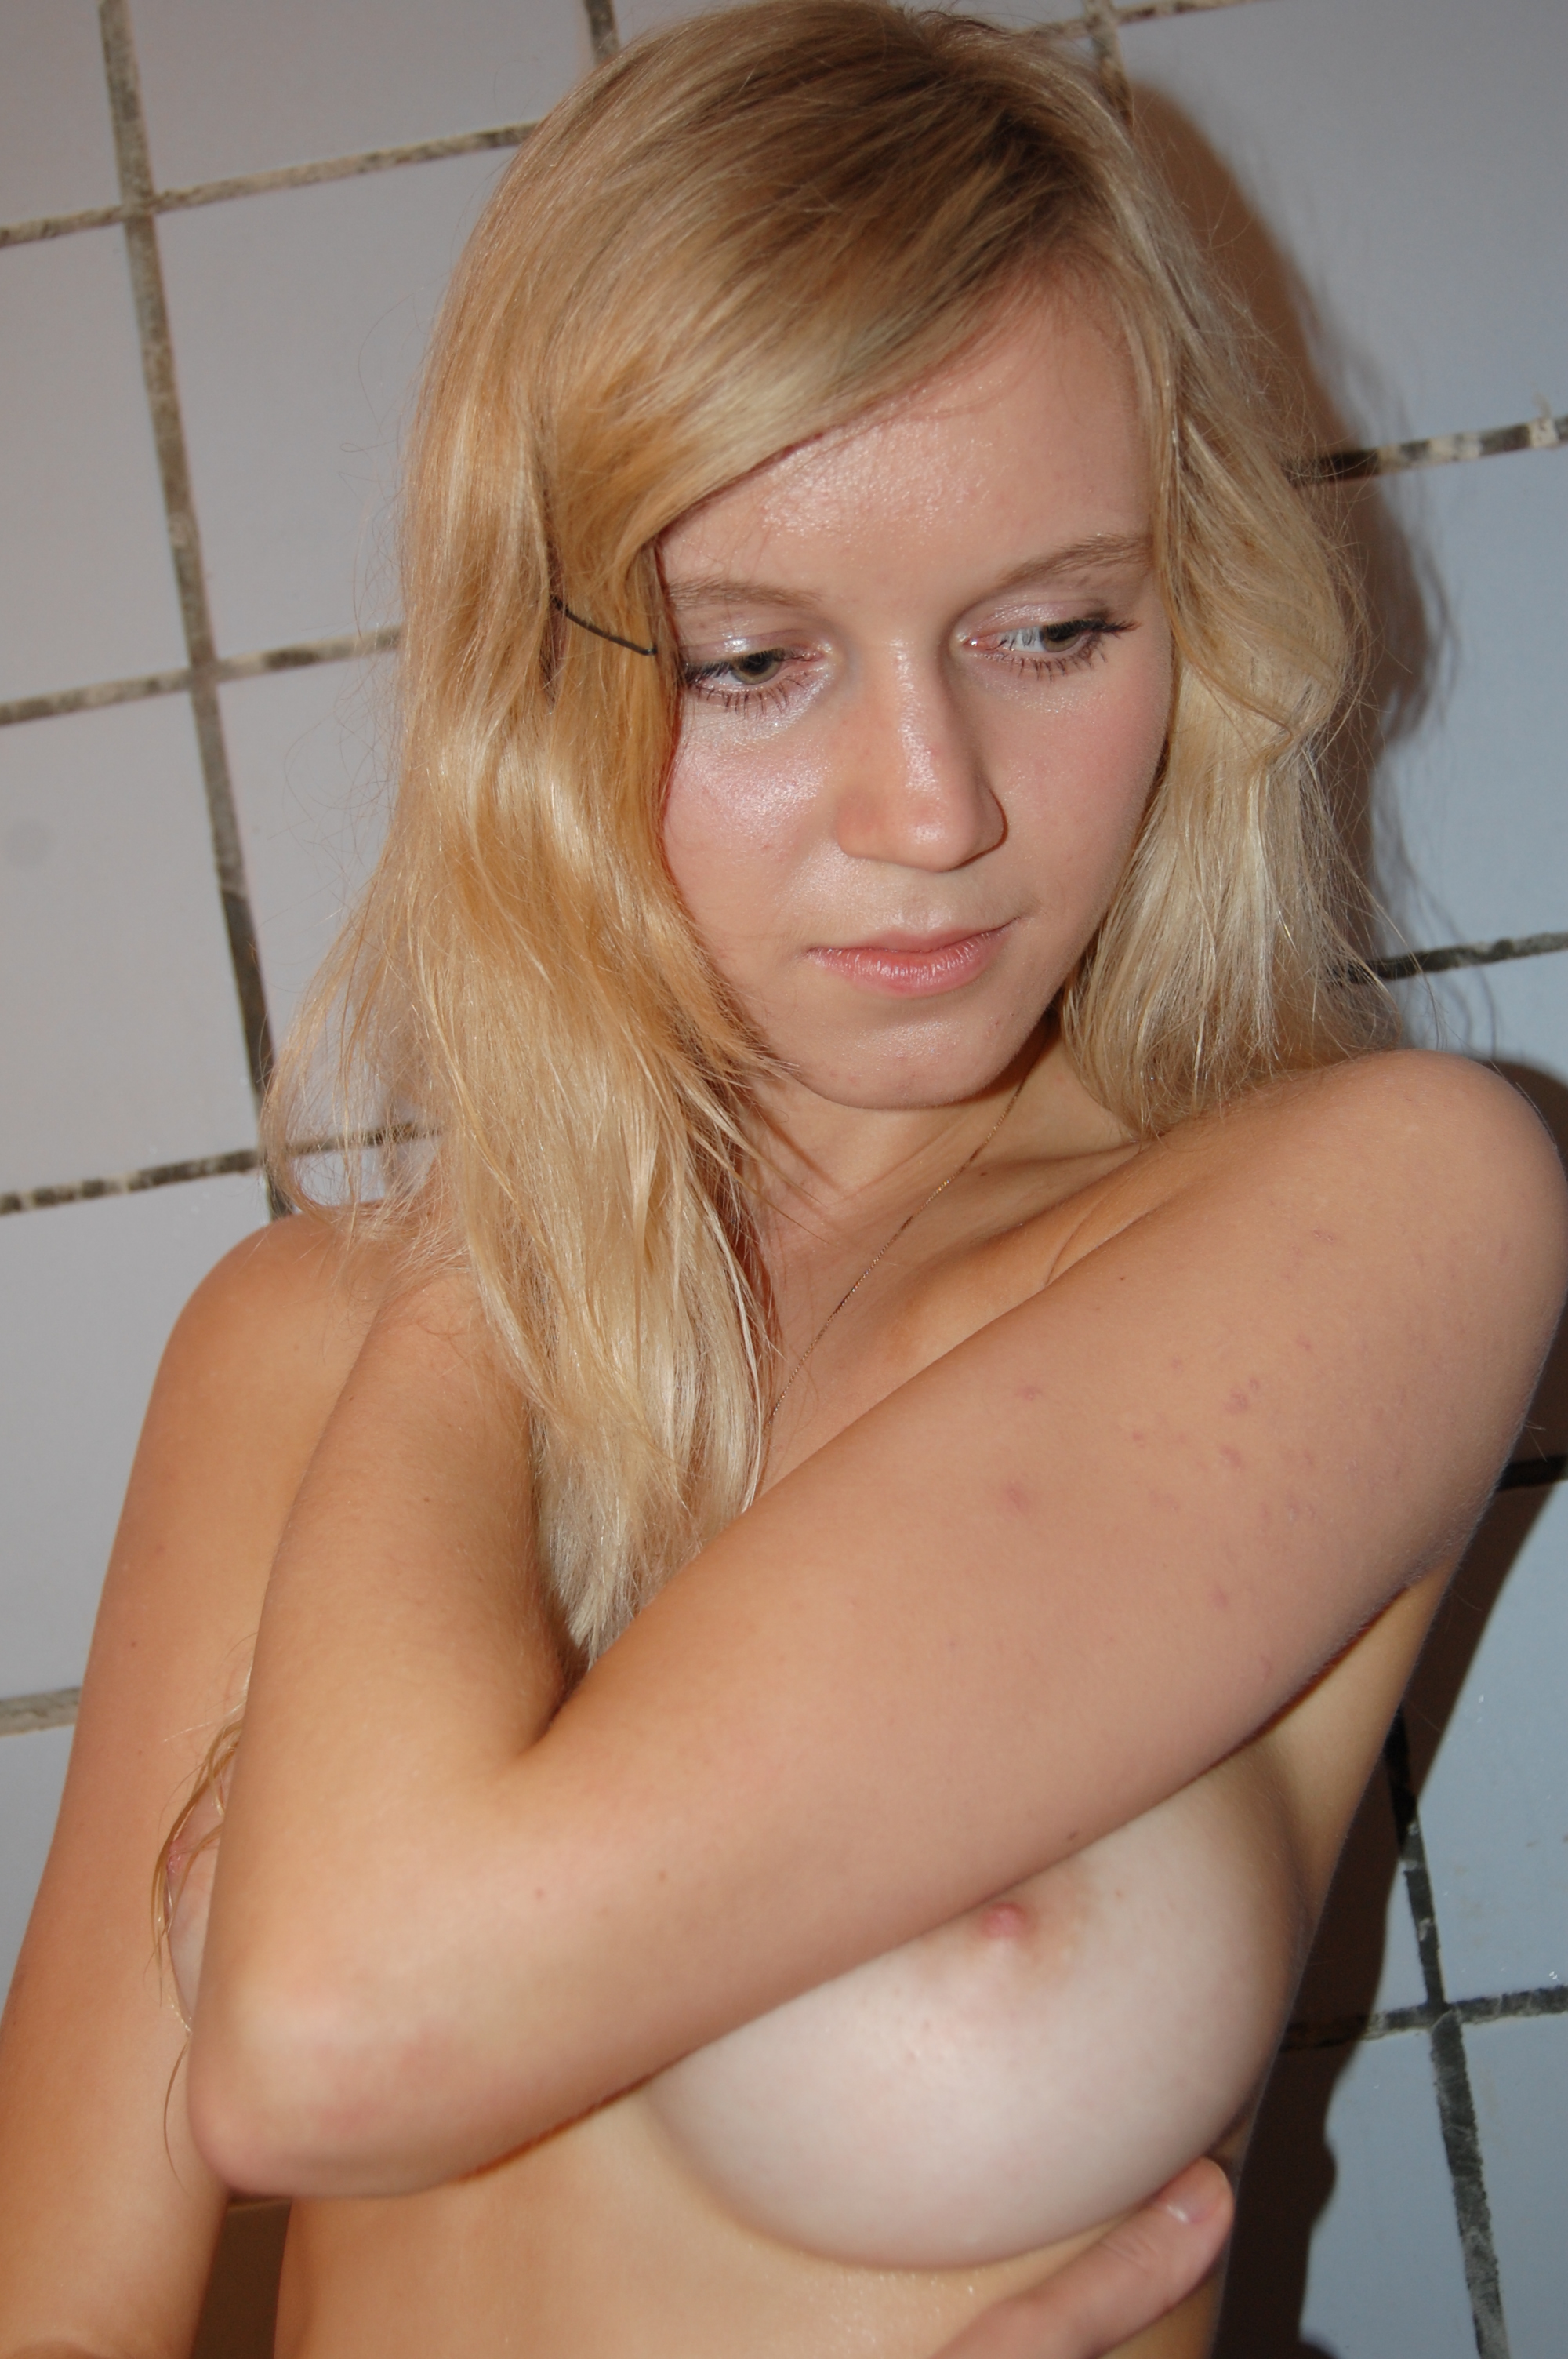 young-amateur-blonde-bathroom-tits-lingerie-naked-23